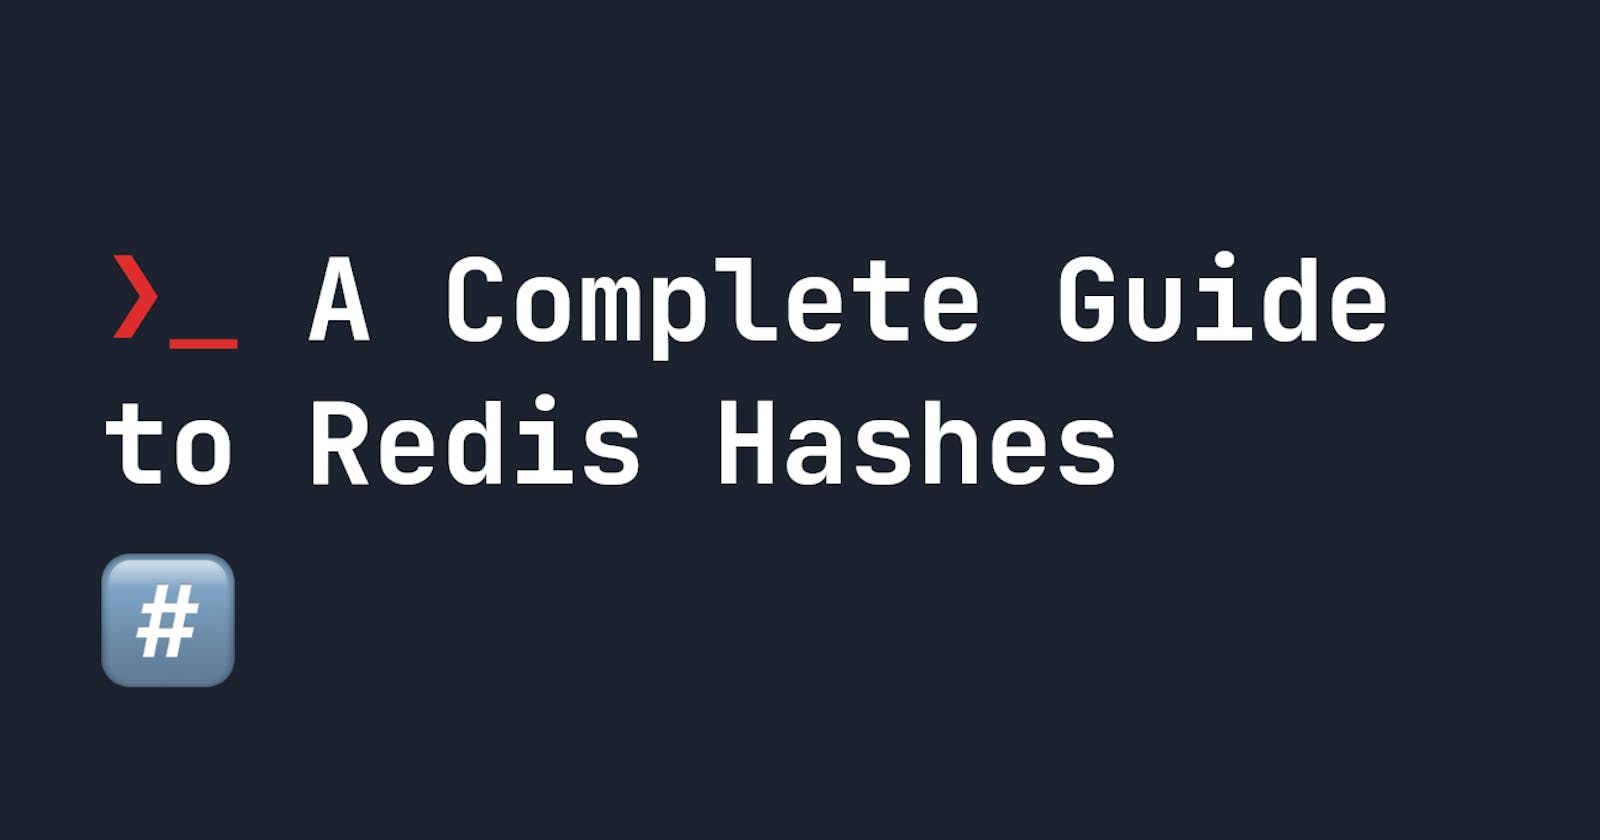 A Complete Guide to Redis Hashes